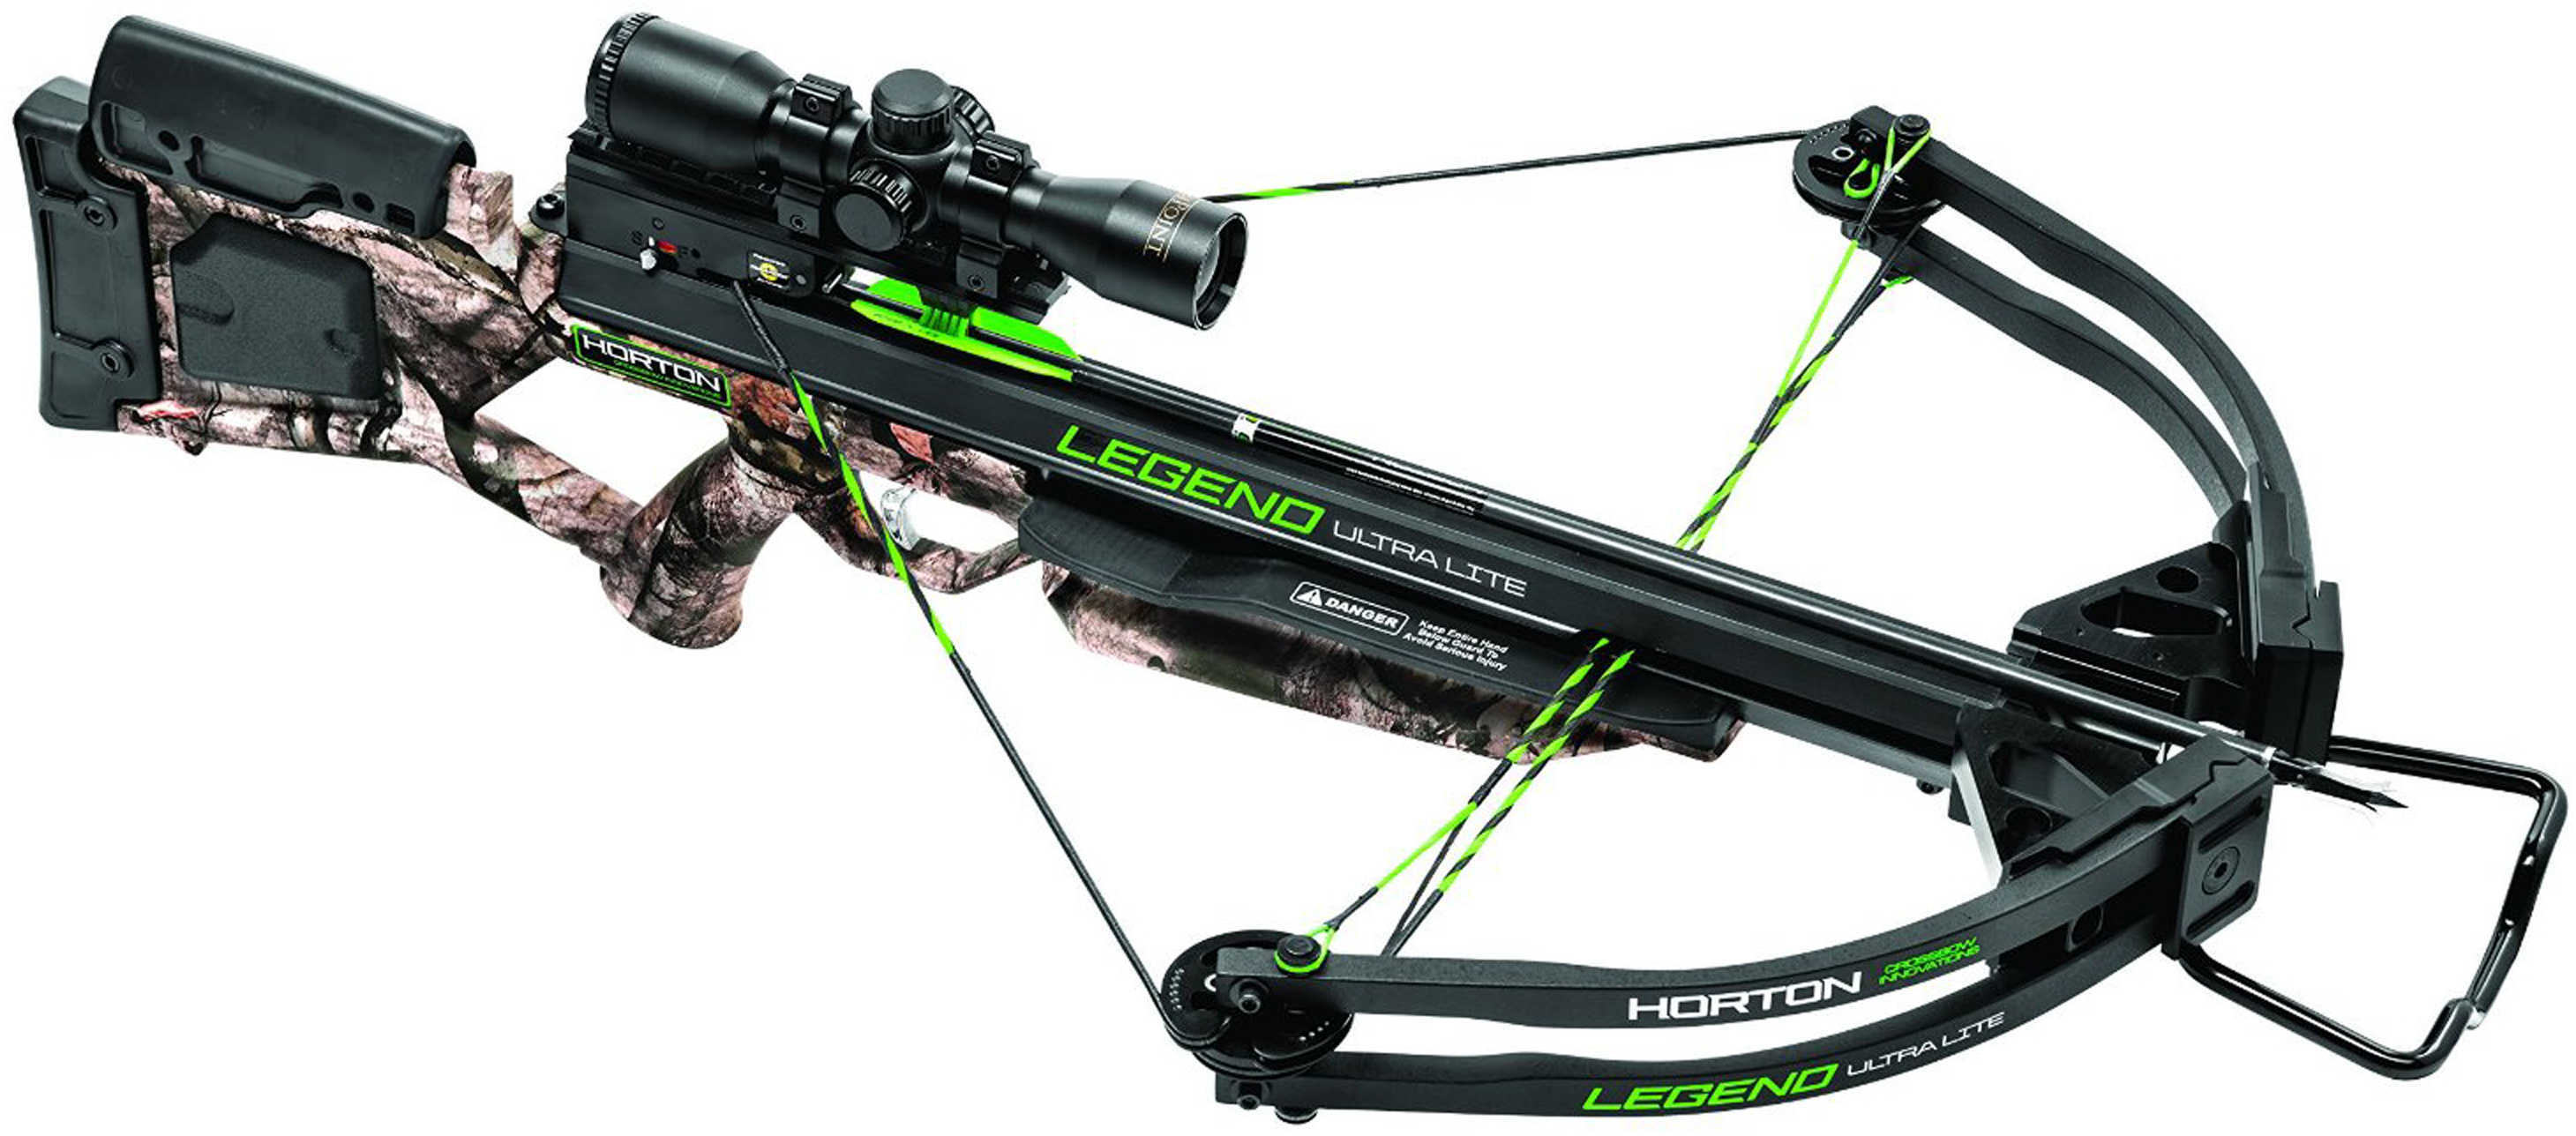 Horton Legend Ultra-Lite Package With 4x32mm Scope, Arrows/Quiver, Mossy Oak Md: NH15050-7520